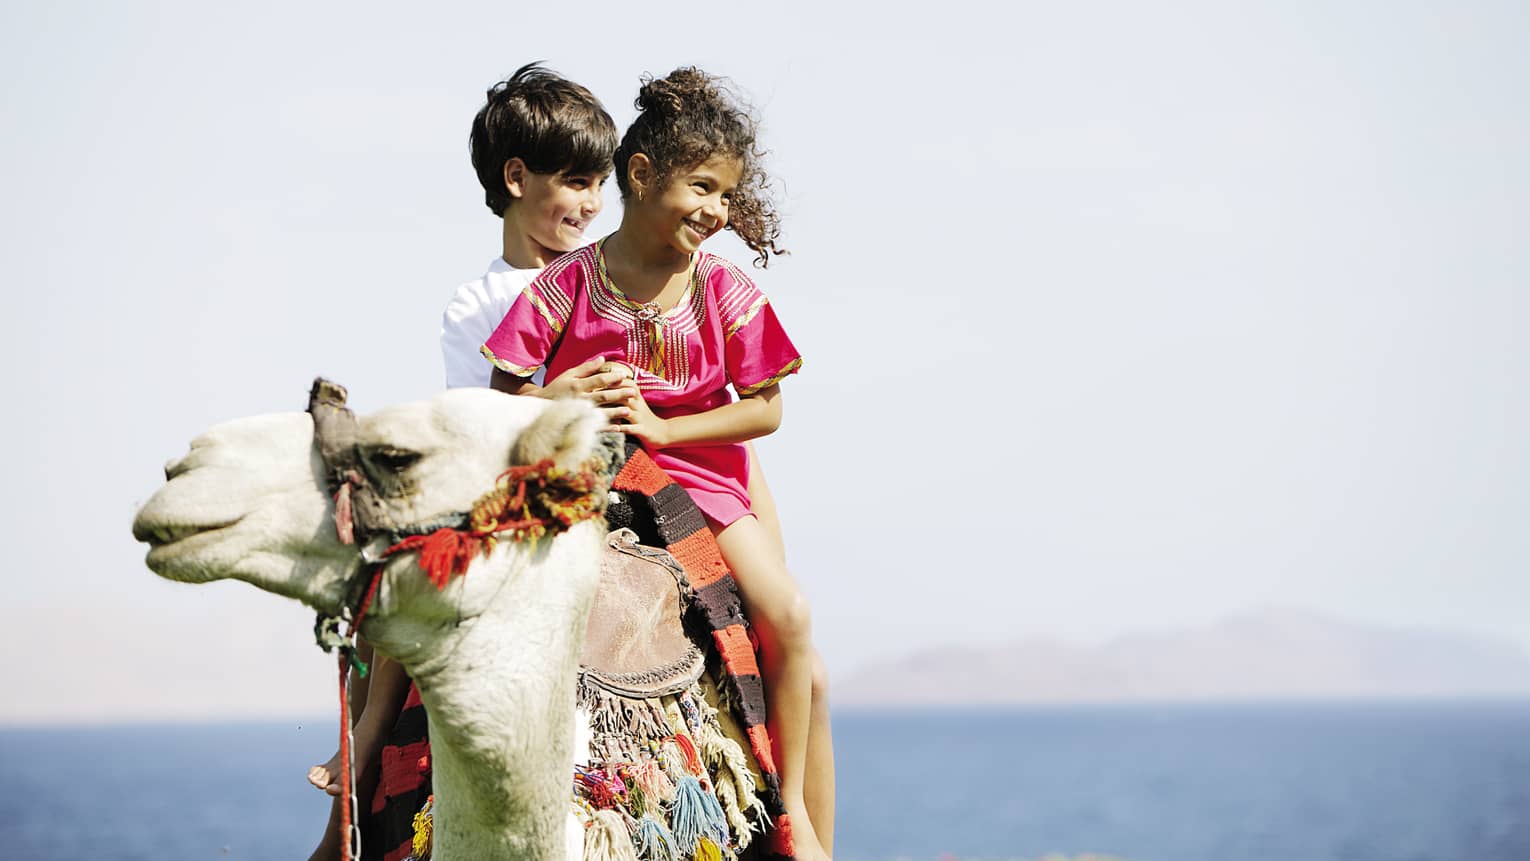 Two smiling children riding on camel